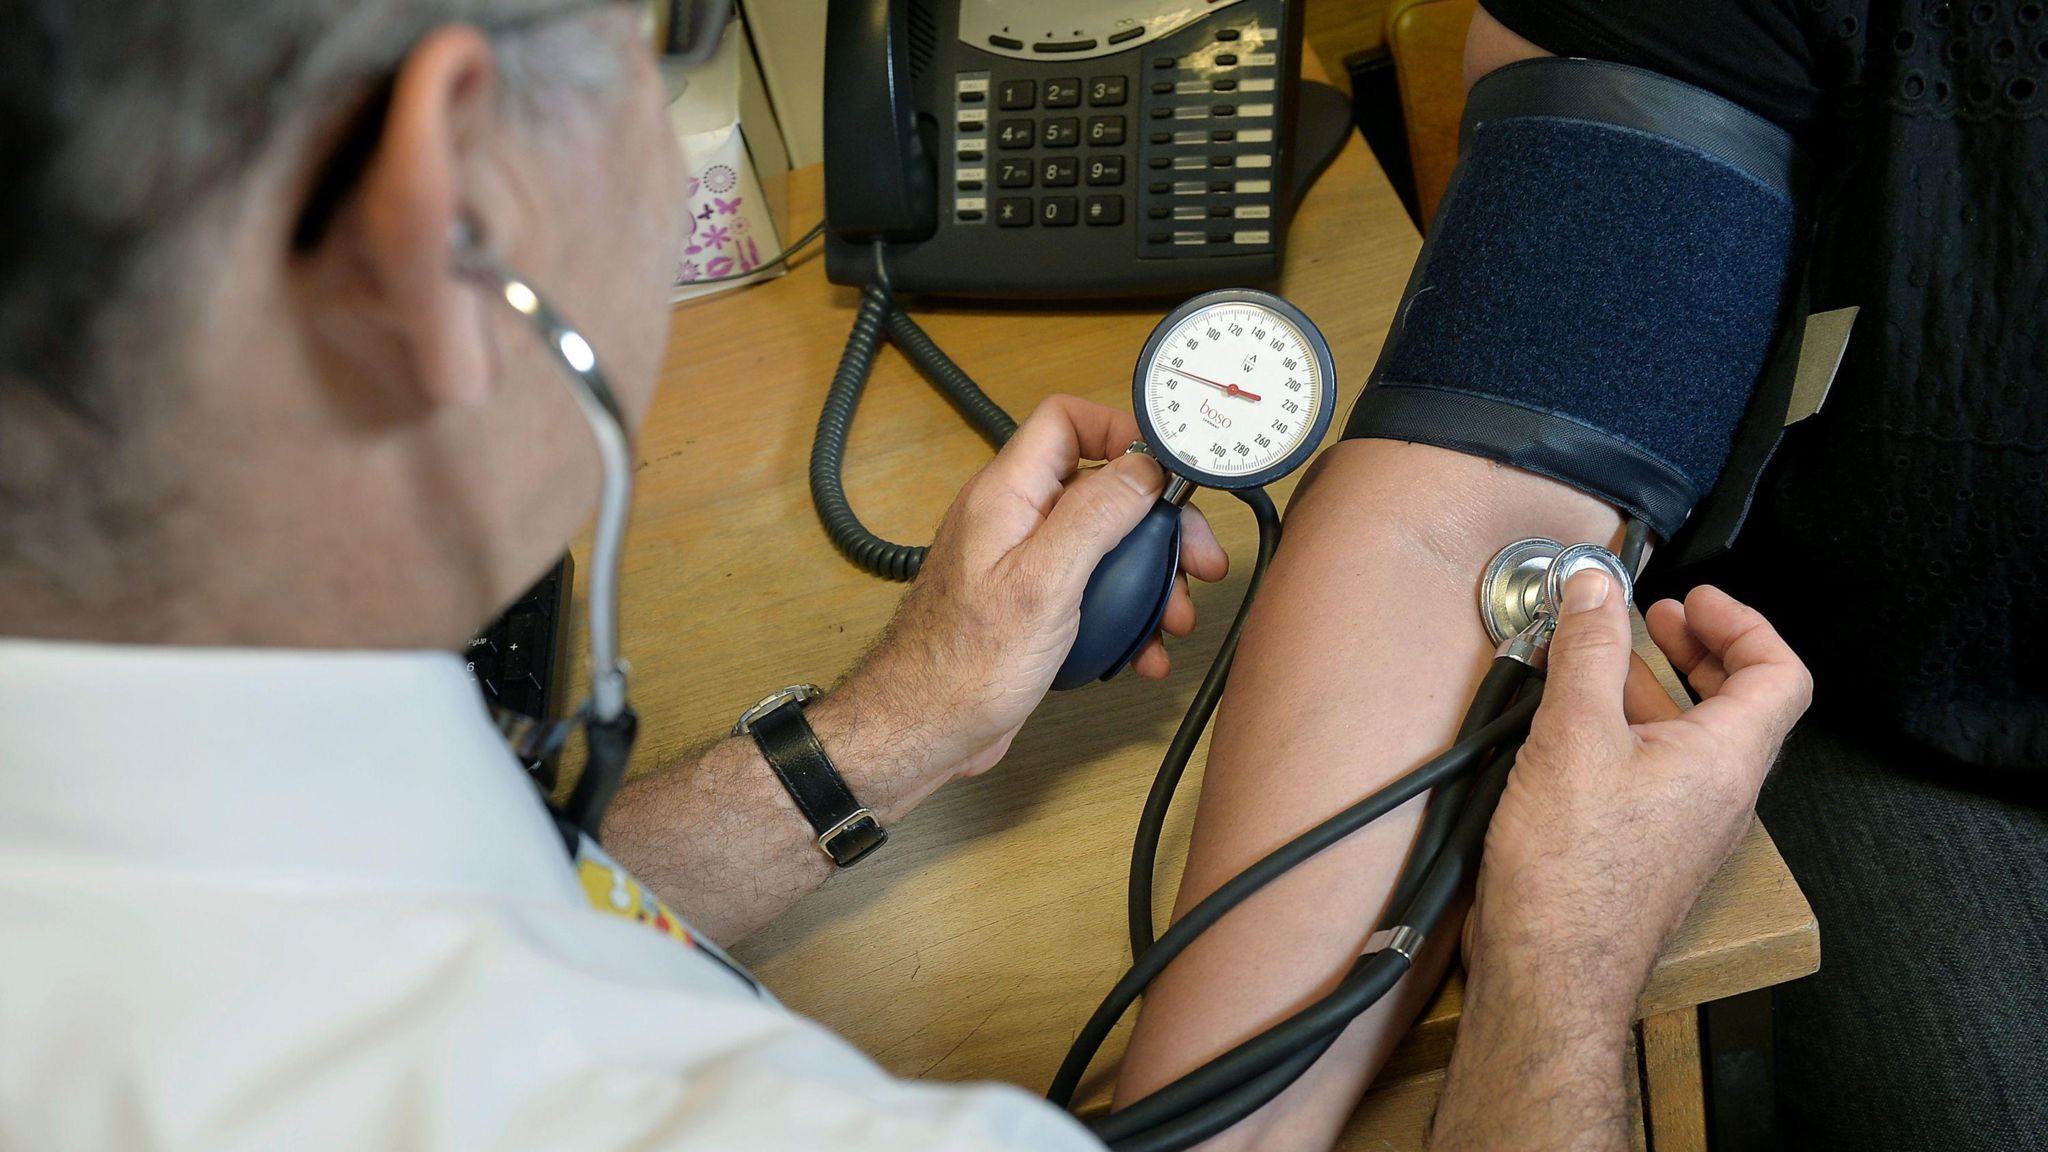 A GP taking a patient's blood pressure